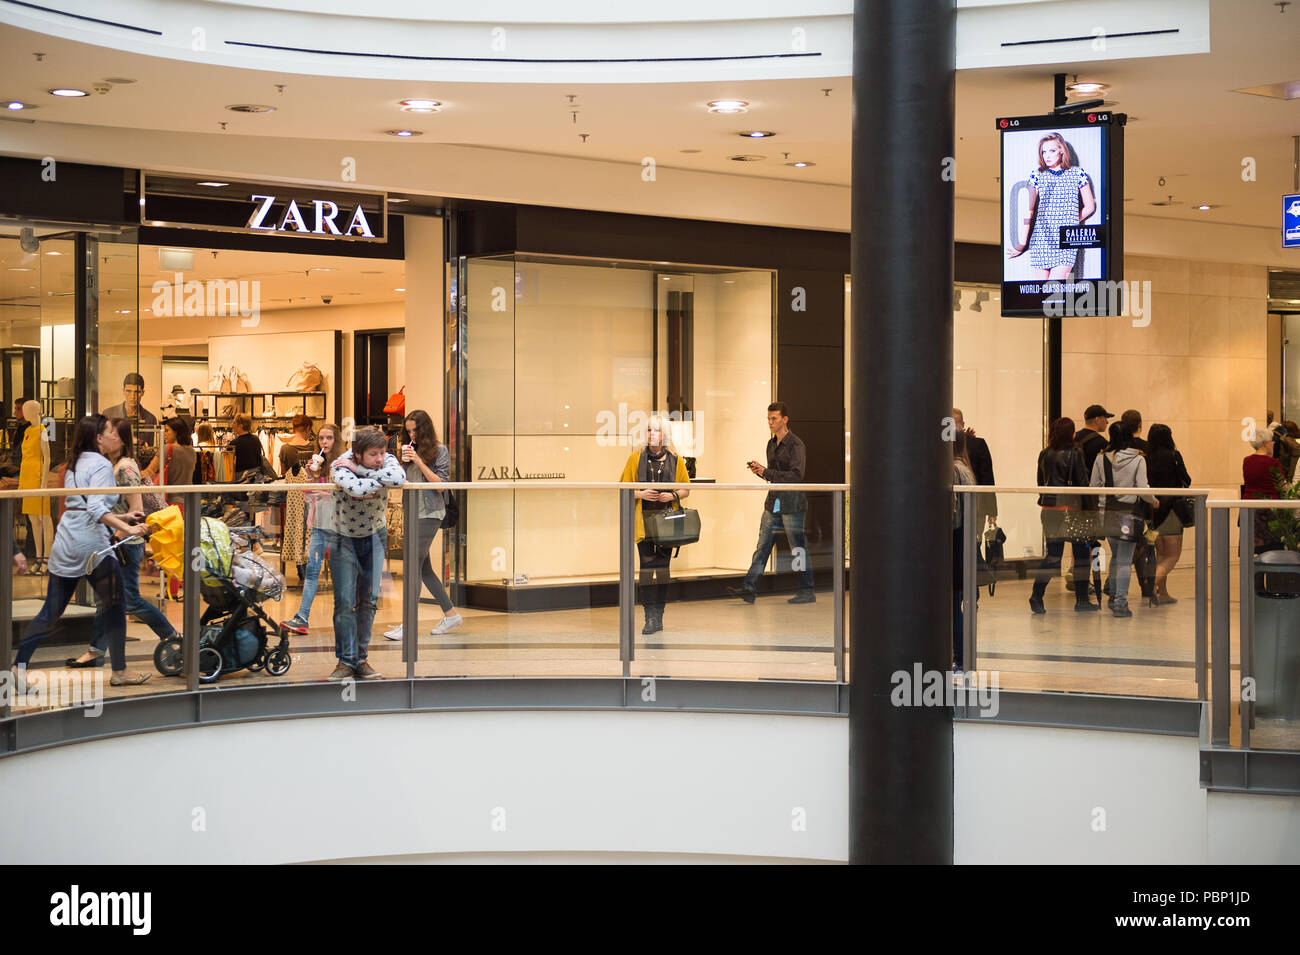 KRAKOW, POLAND - MAY 30, 2015: Zara section of Galeria Krakowska city mall  Krakow, Poland. Galeria Krakowska has 270 specialty shops, cafes, and resta  Stock Photo - Alamy